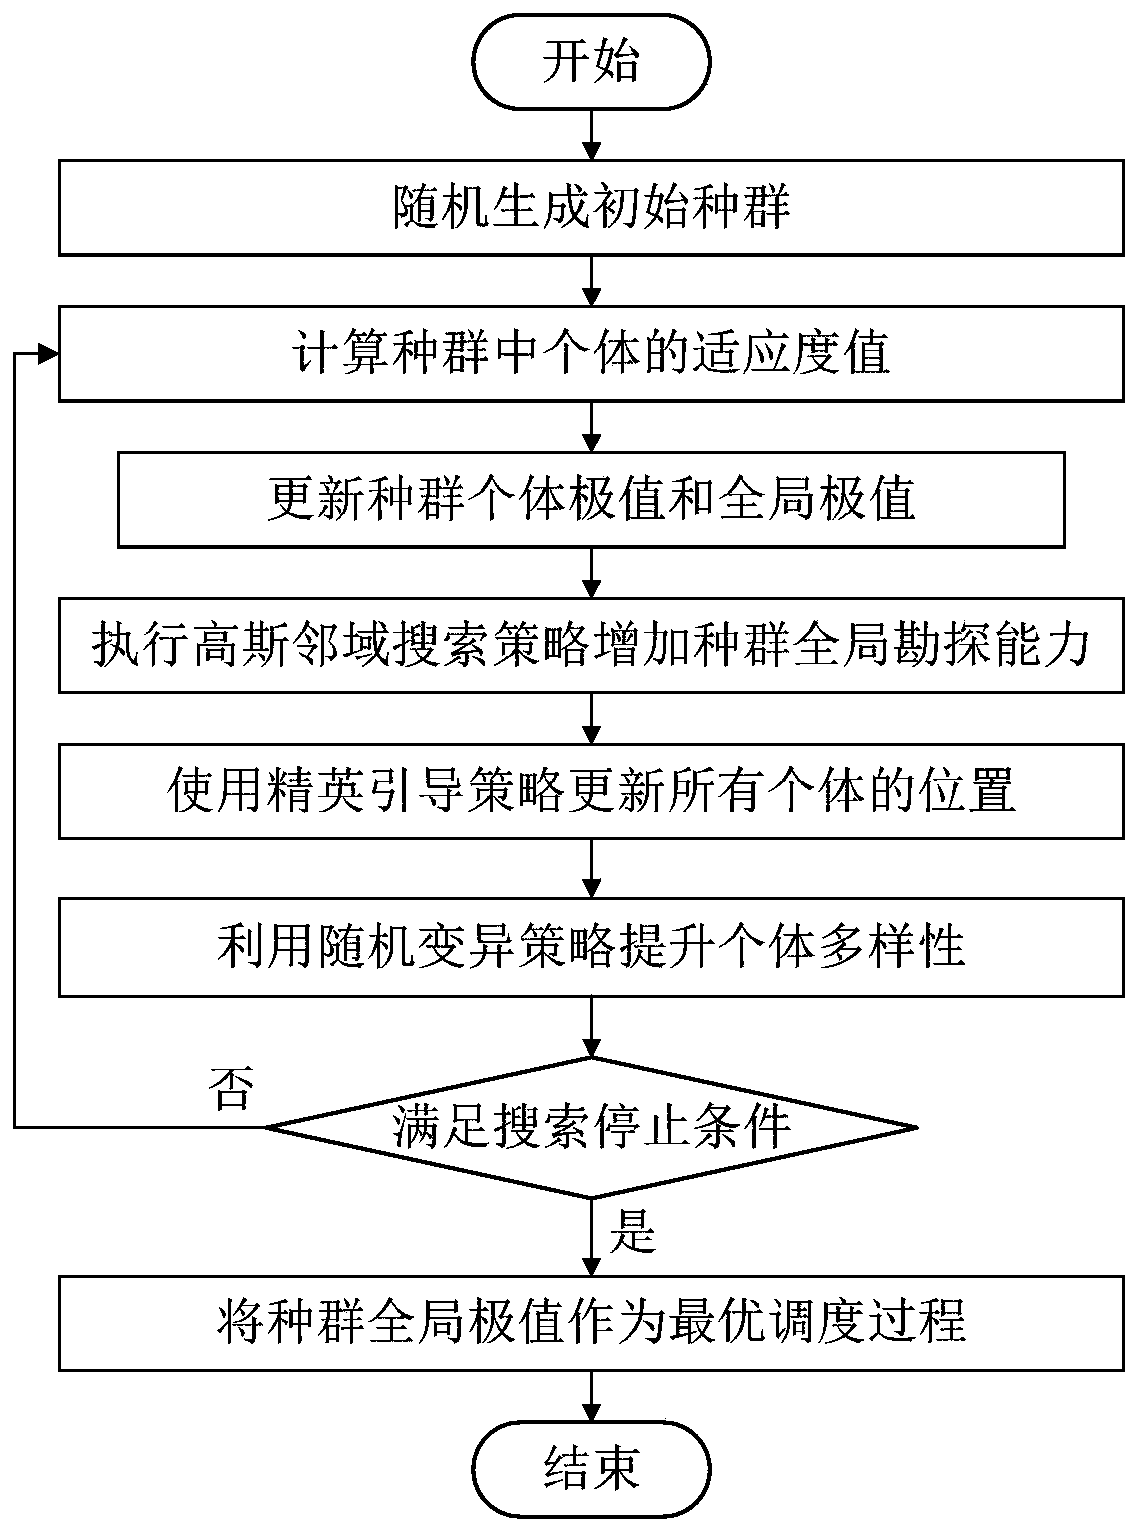 Short-term peak regulation scheduling collaborative optimization method and system for cascade hydropower station group